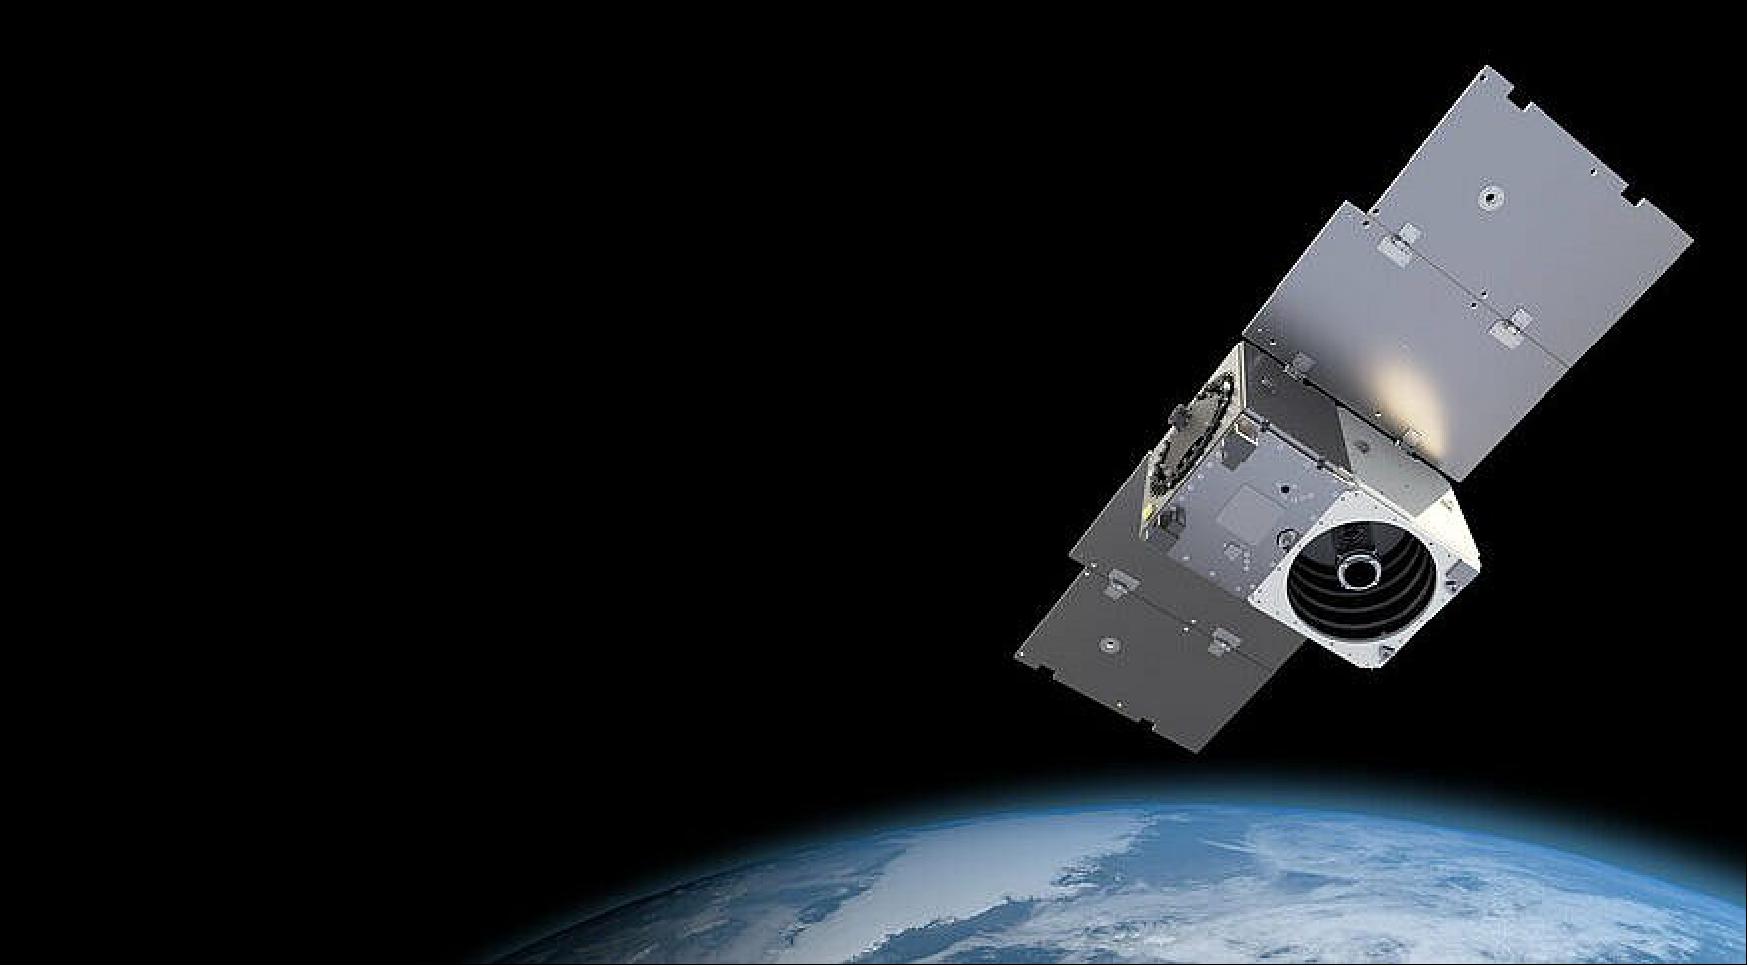 Figure 7: Planet unveiled “very high resolution” Pelican Earth-imaging satellites, which the company plans to design, build and manufacture in-house (image credit: Planet Labs Inc.)